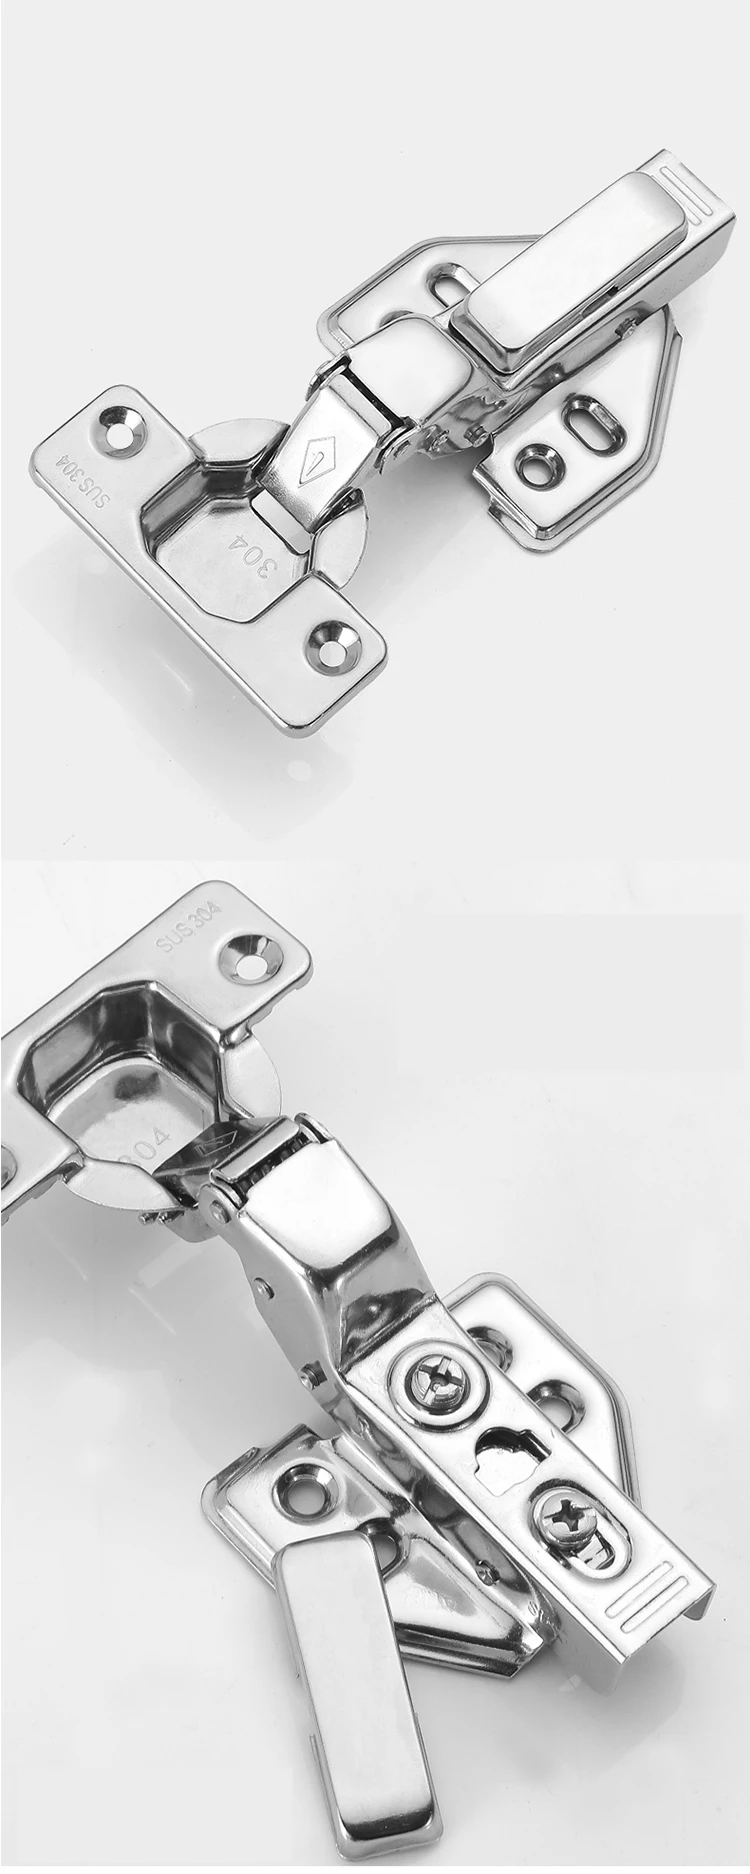 Hot Selling Cheap Stainless Steel 304 Hinges, Kitchen Furniture Cabinet Concealed Door  Hinges//